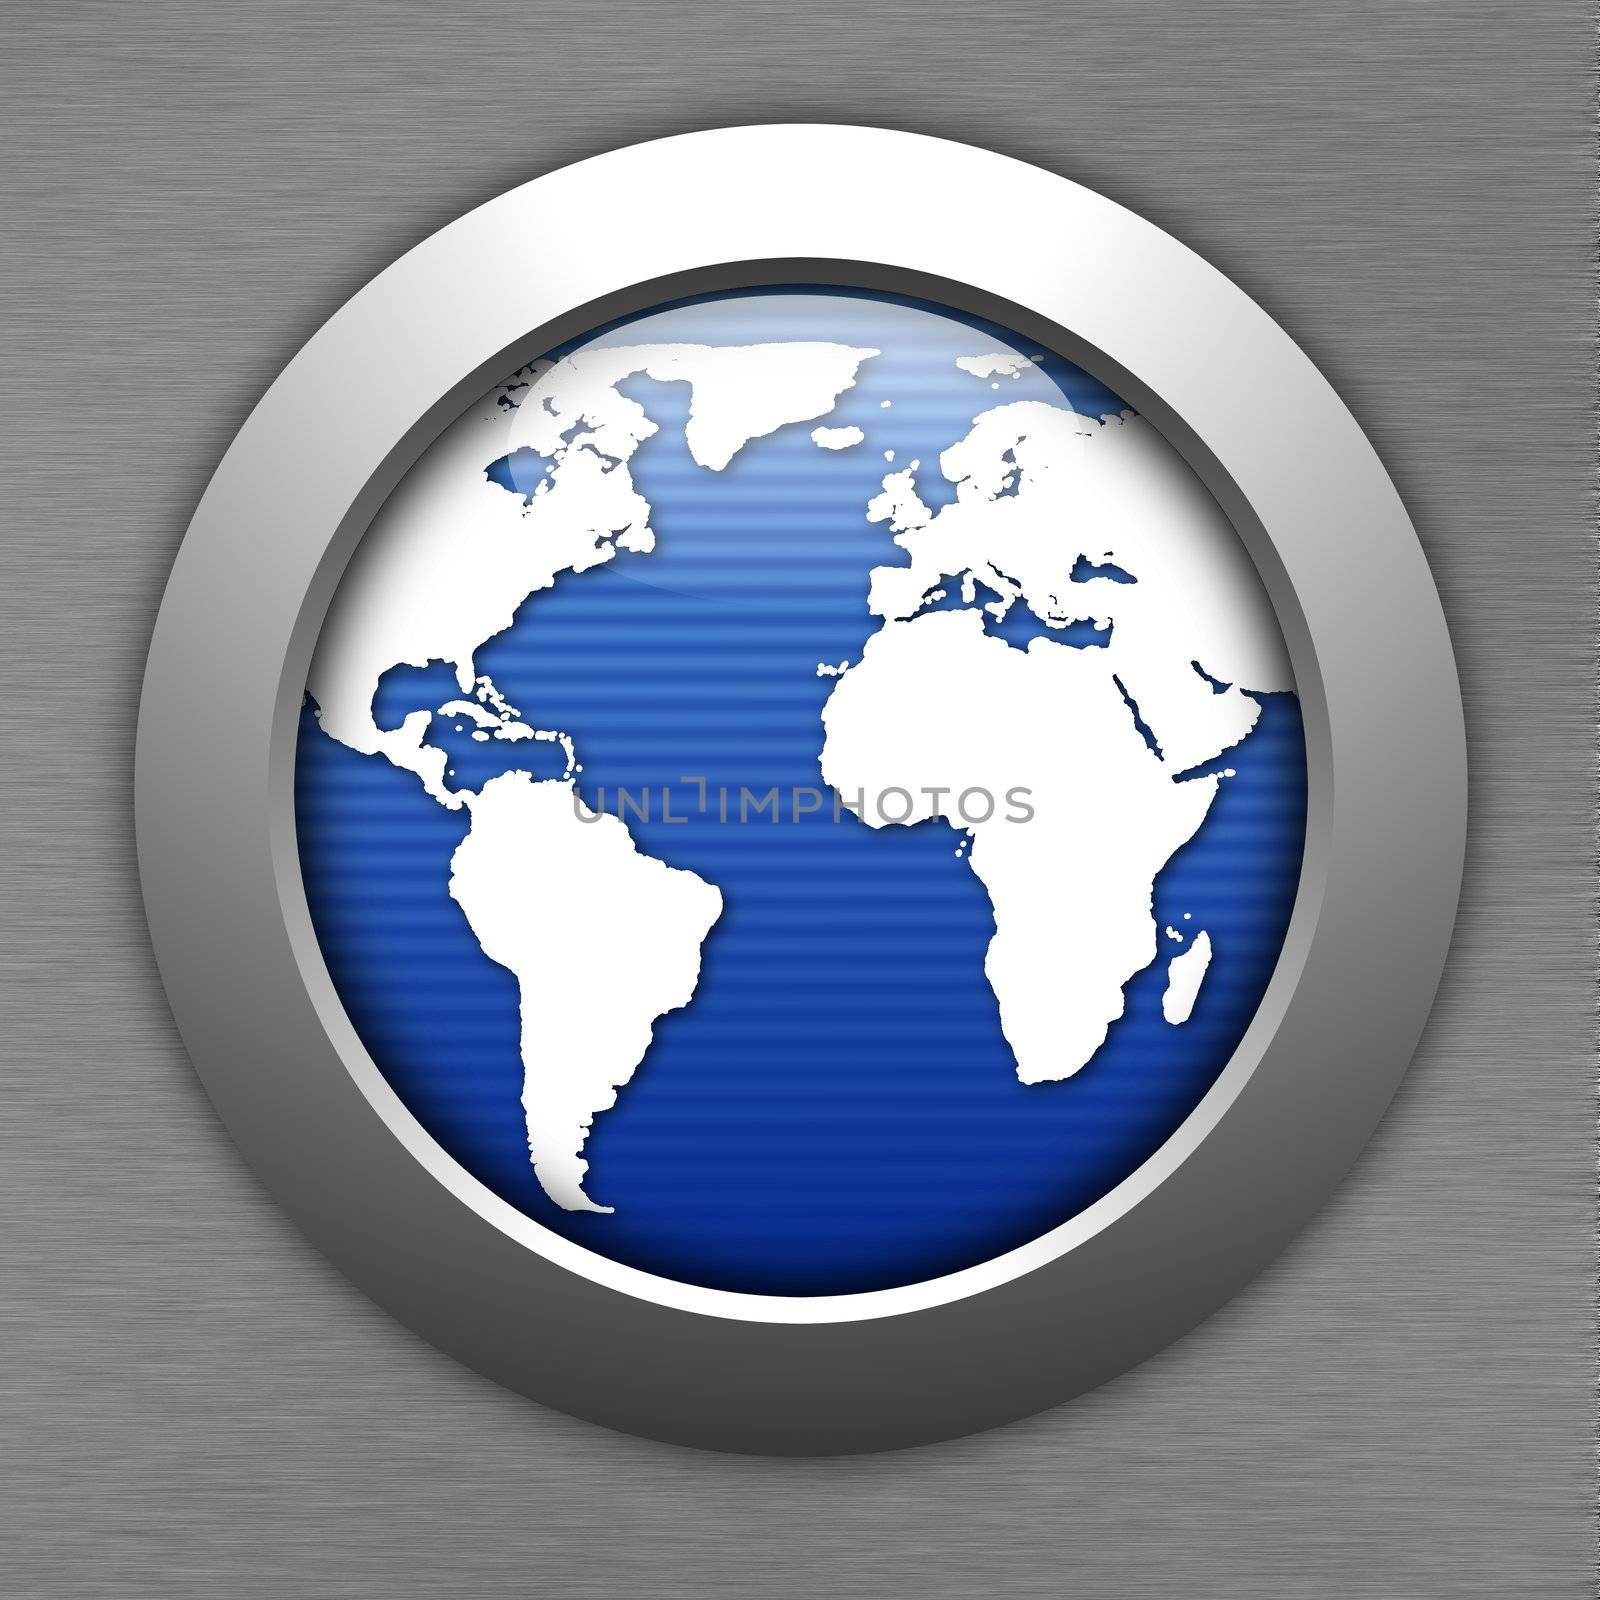 world map button for internet web site